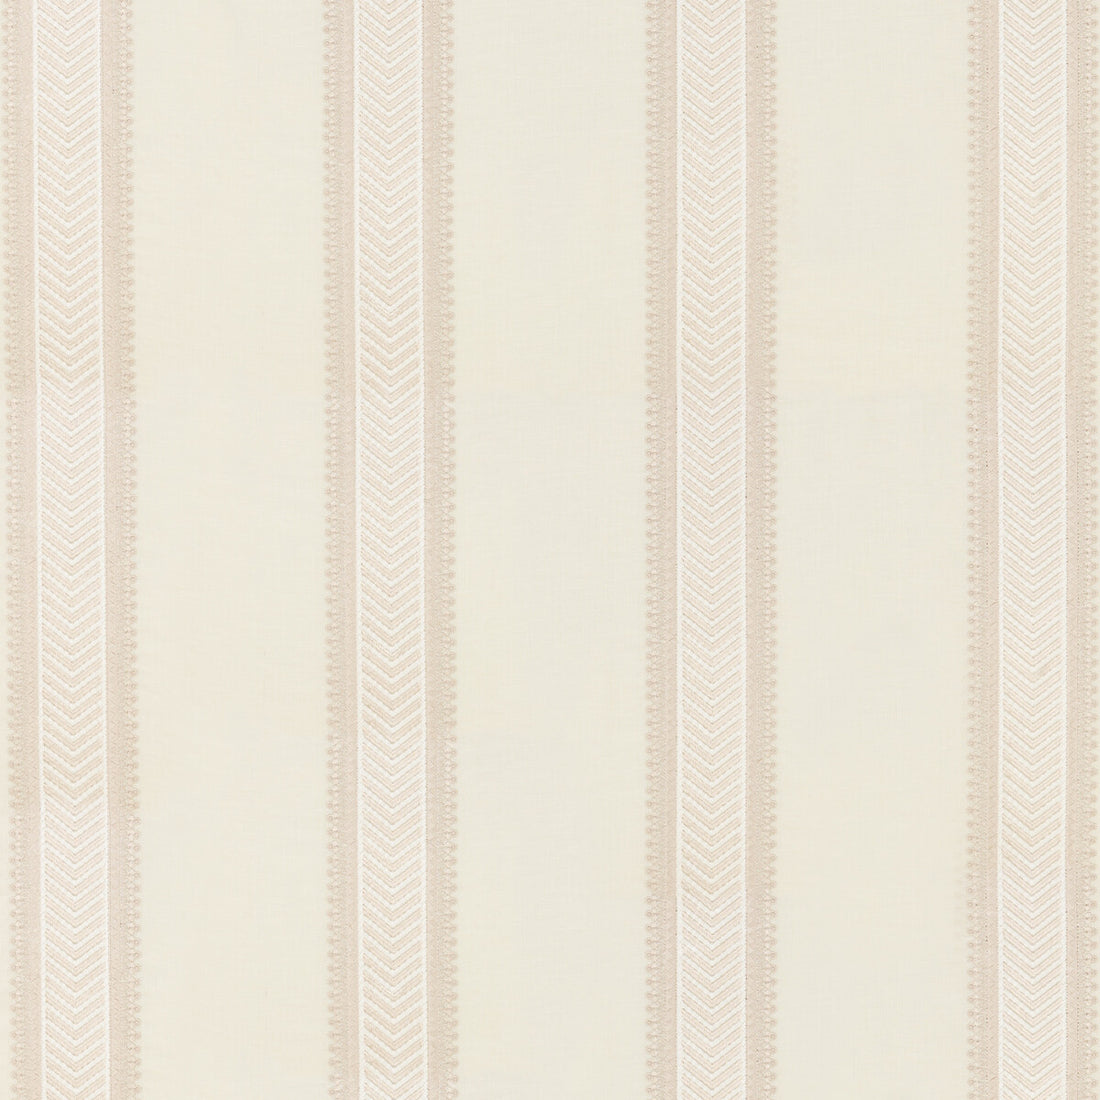 Kerris Stripe fabric in ivory/stone color - pattern BF10799.1.0 - by G P &amp; J Baker in the Artisan II collection